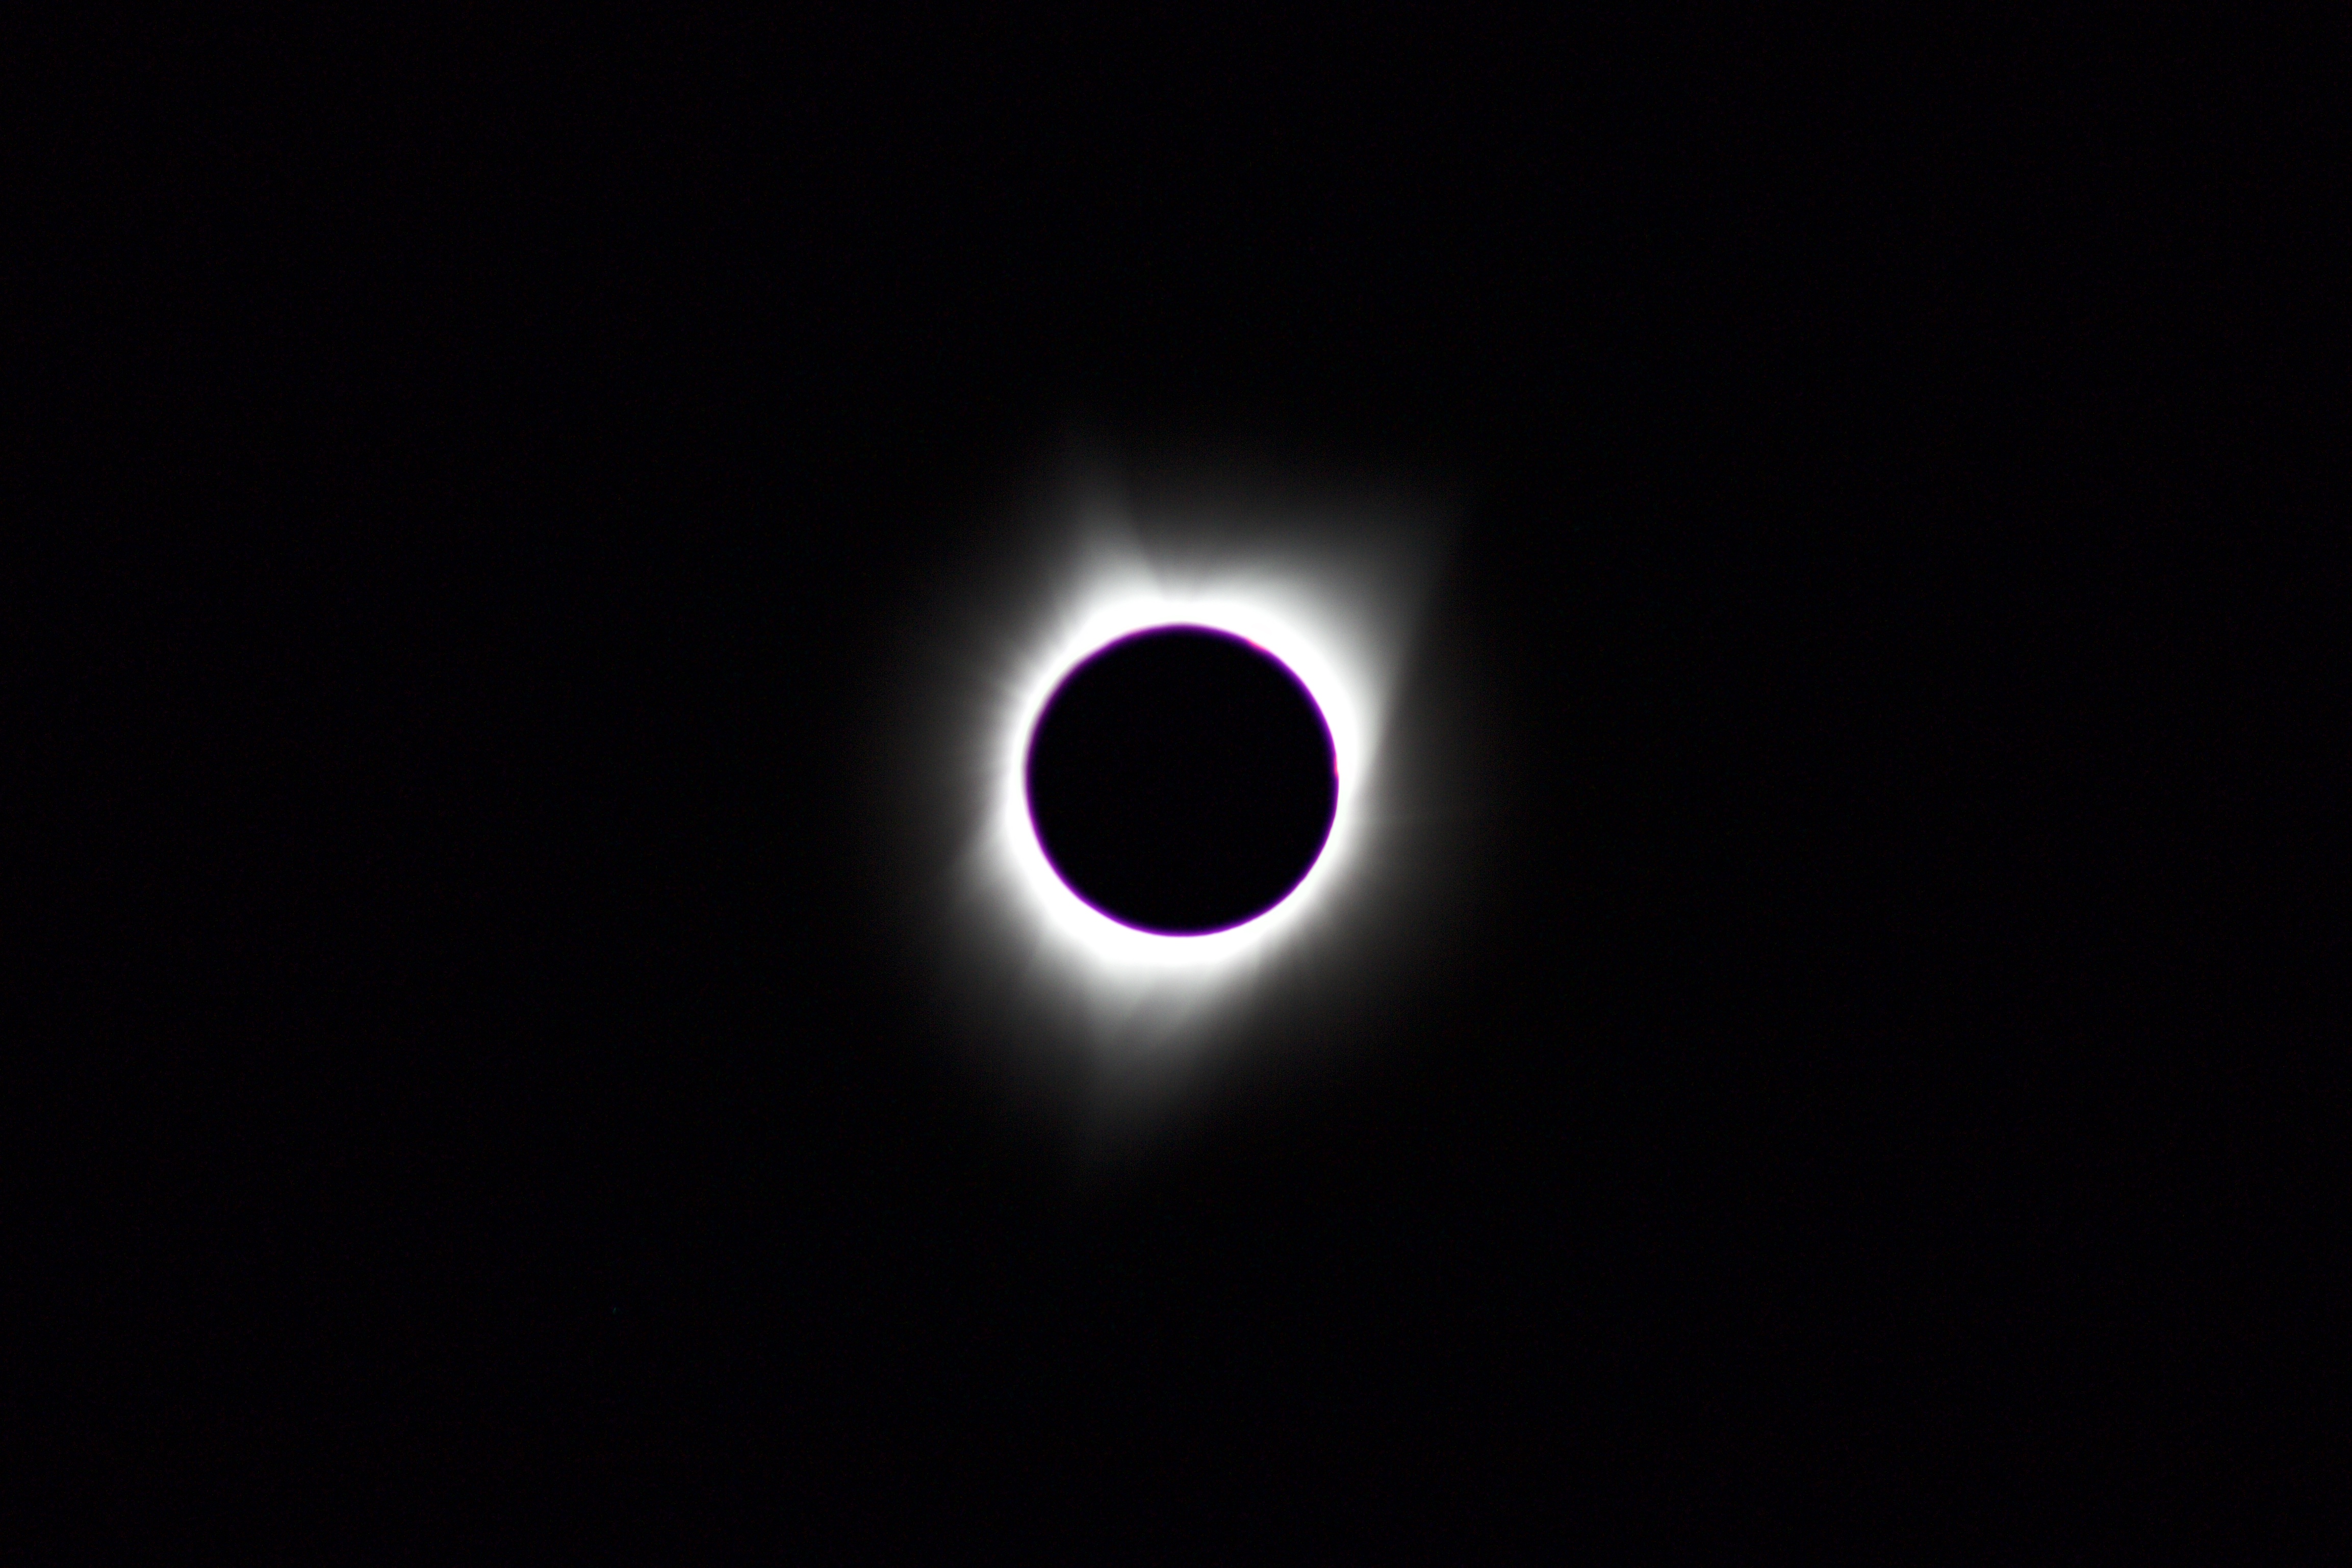 Solar Eclipse 2017, viewed from Kelly, Wyoming